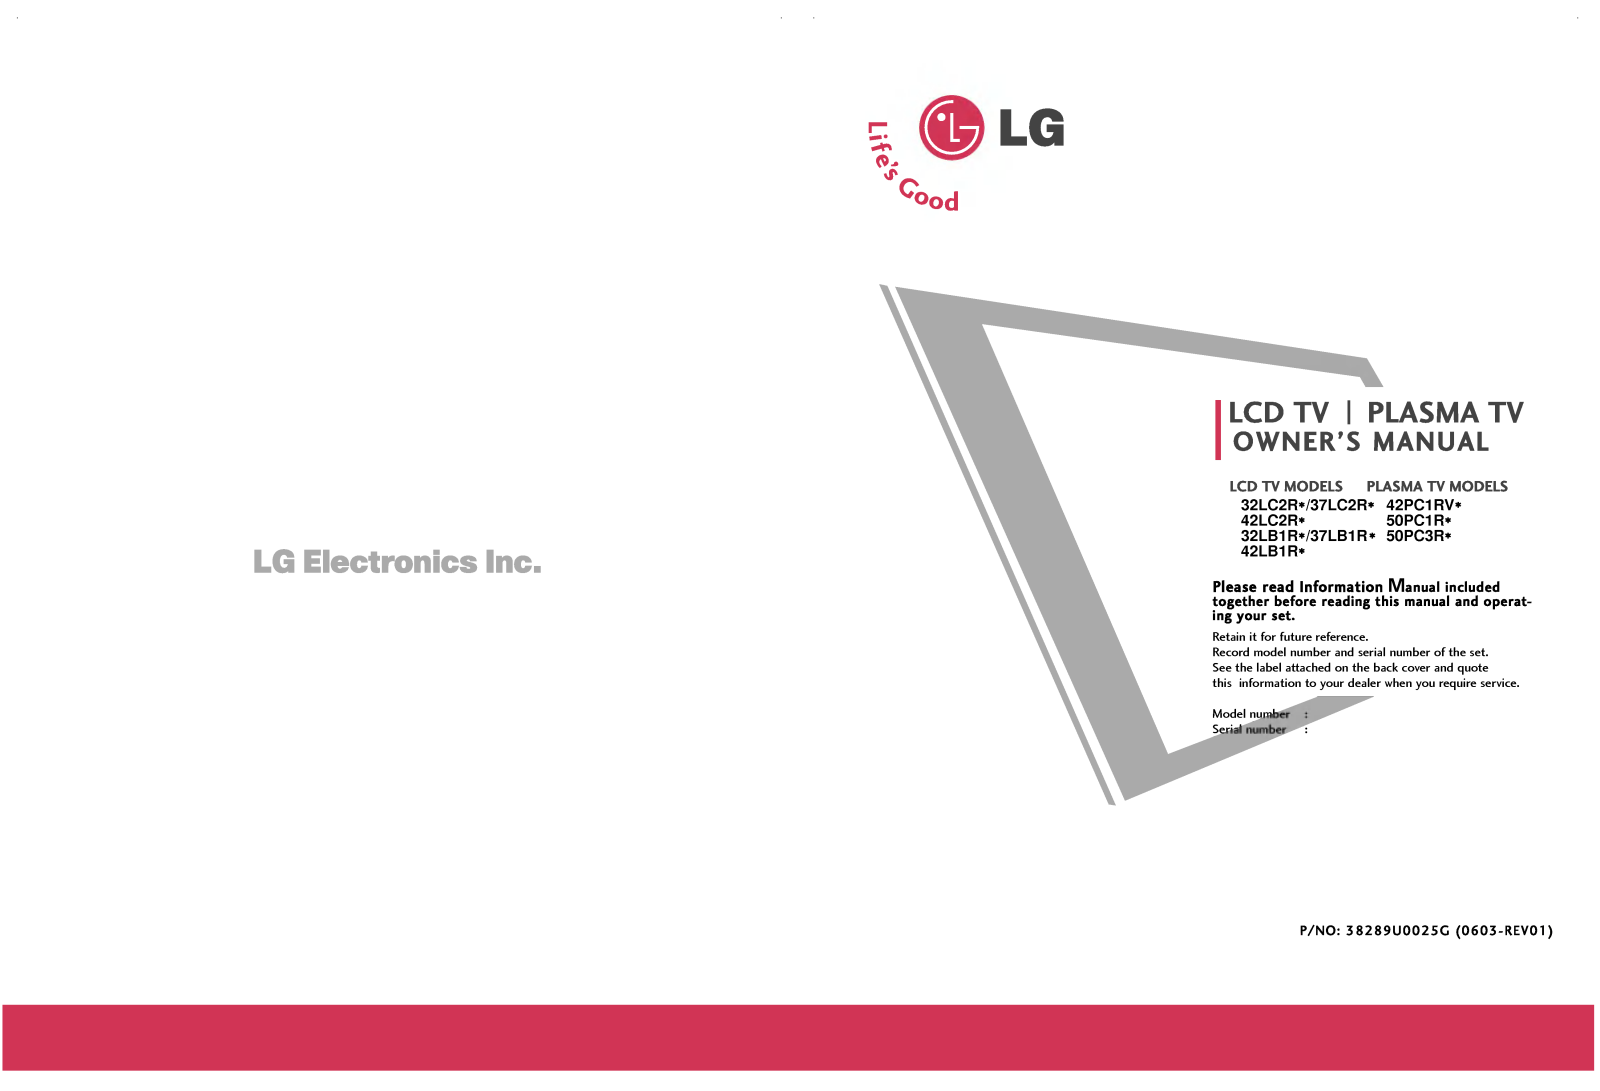 LG 50PC1R-TH Owner’s Manual